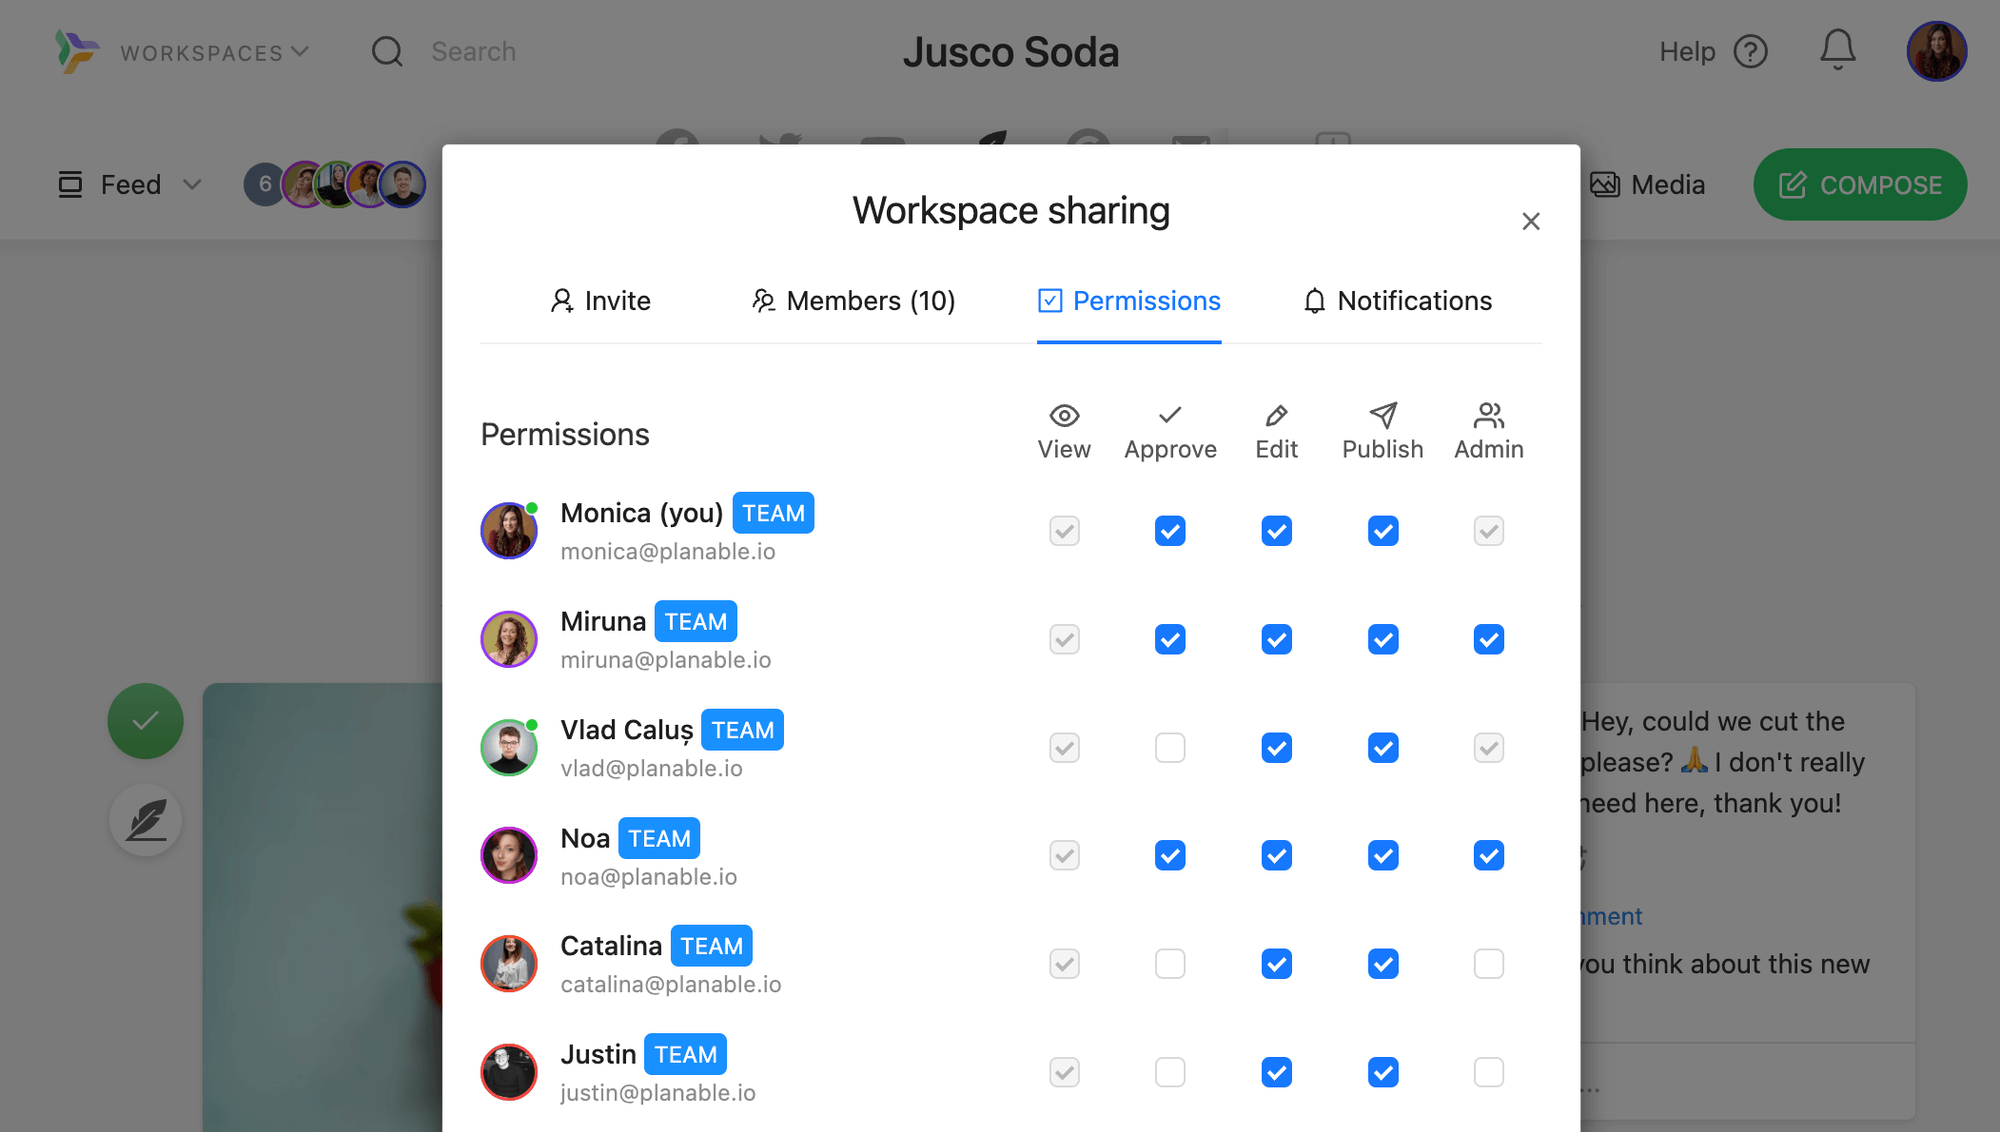 Workspace permissions settings for team members in Planable with detailing view, edit, and publish rights.